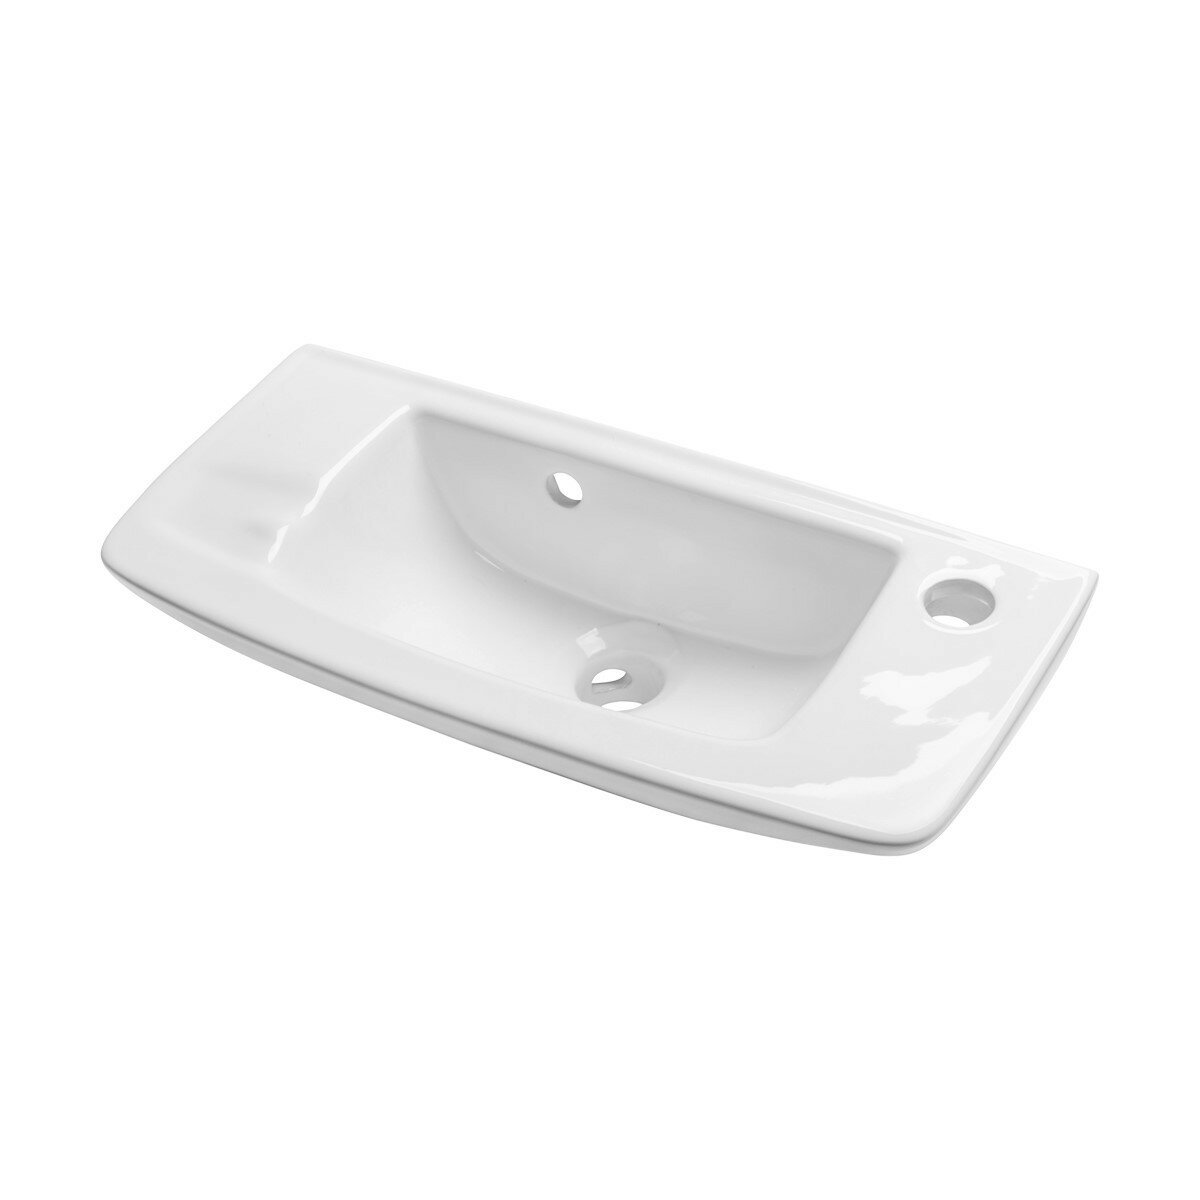 Small 20 Wall Mount Bathroom Sink With Overflow